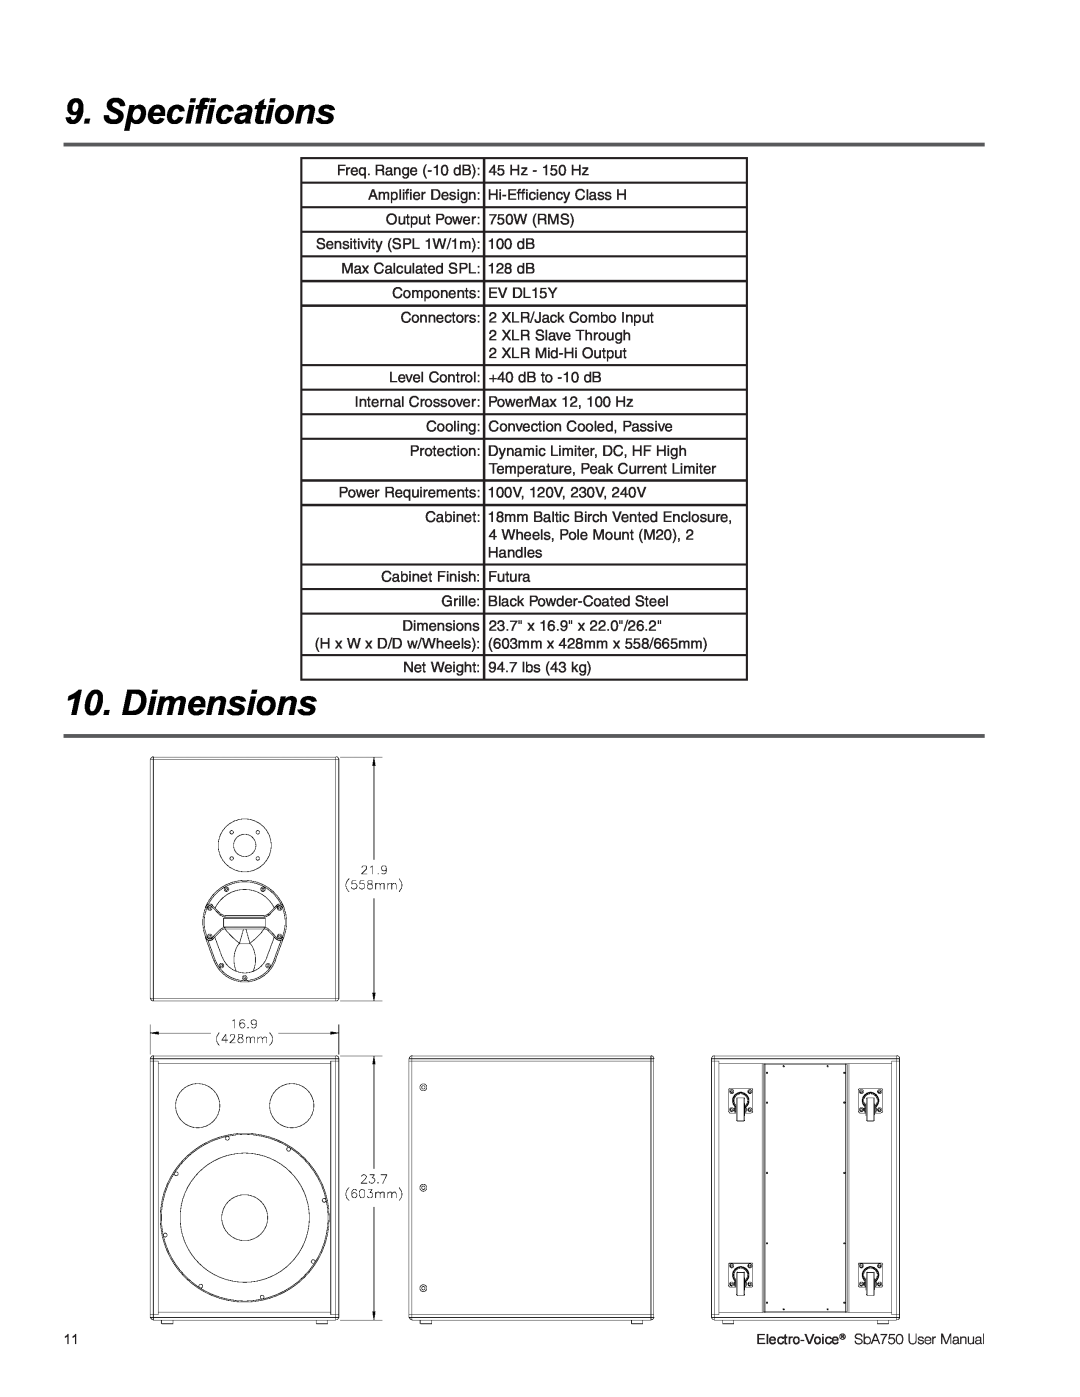 Electro-Voice SBA750 user manual Specifications, Dimensions, Electro-Voice 